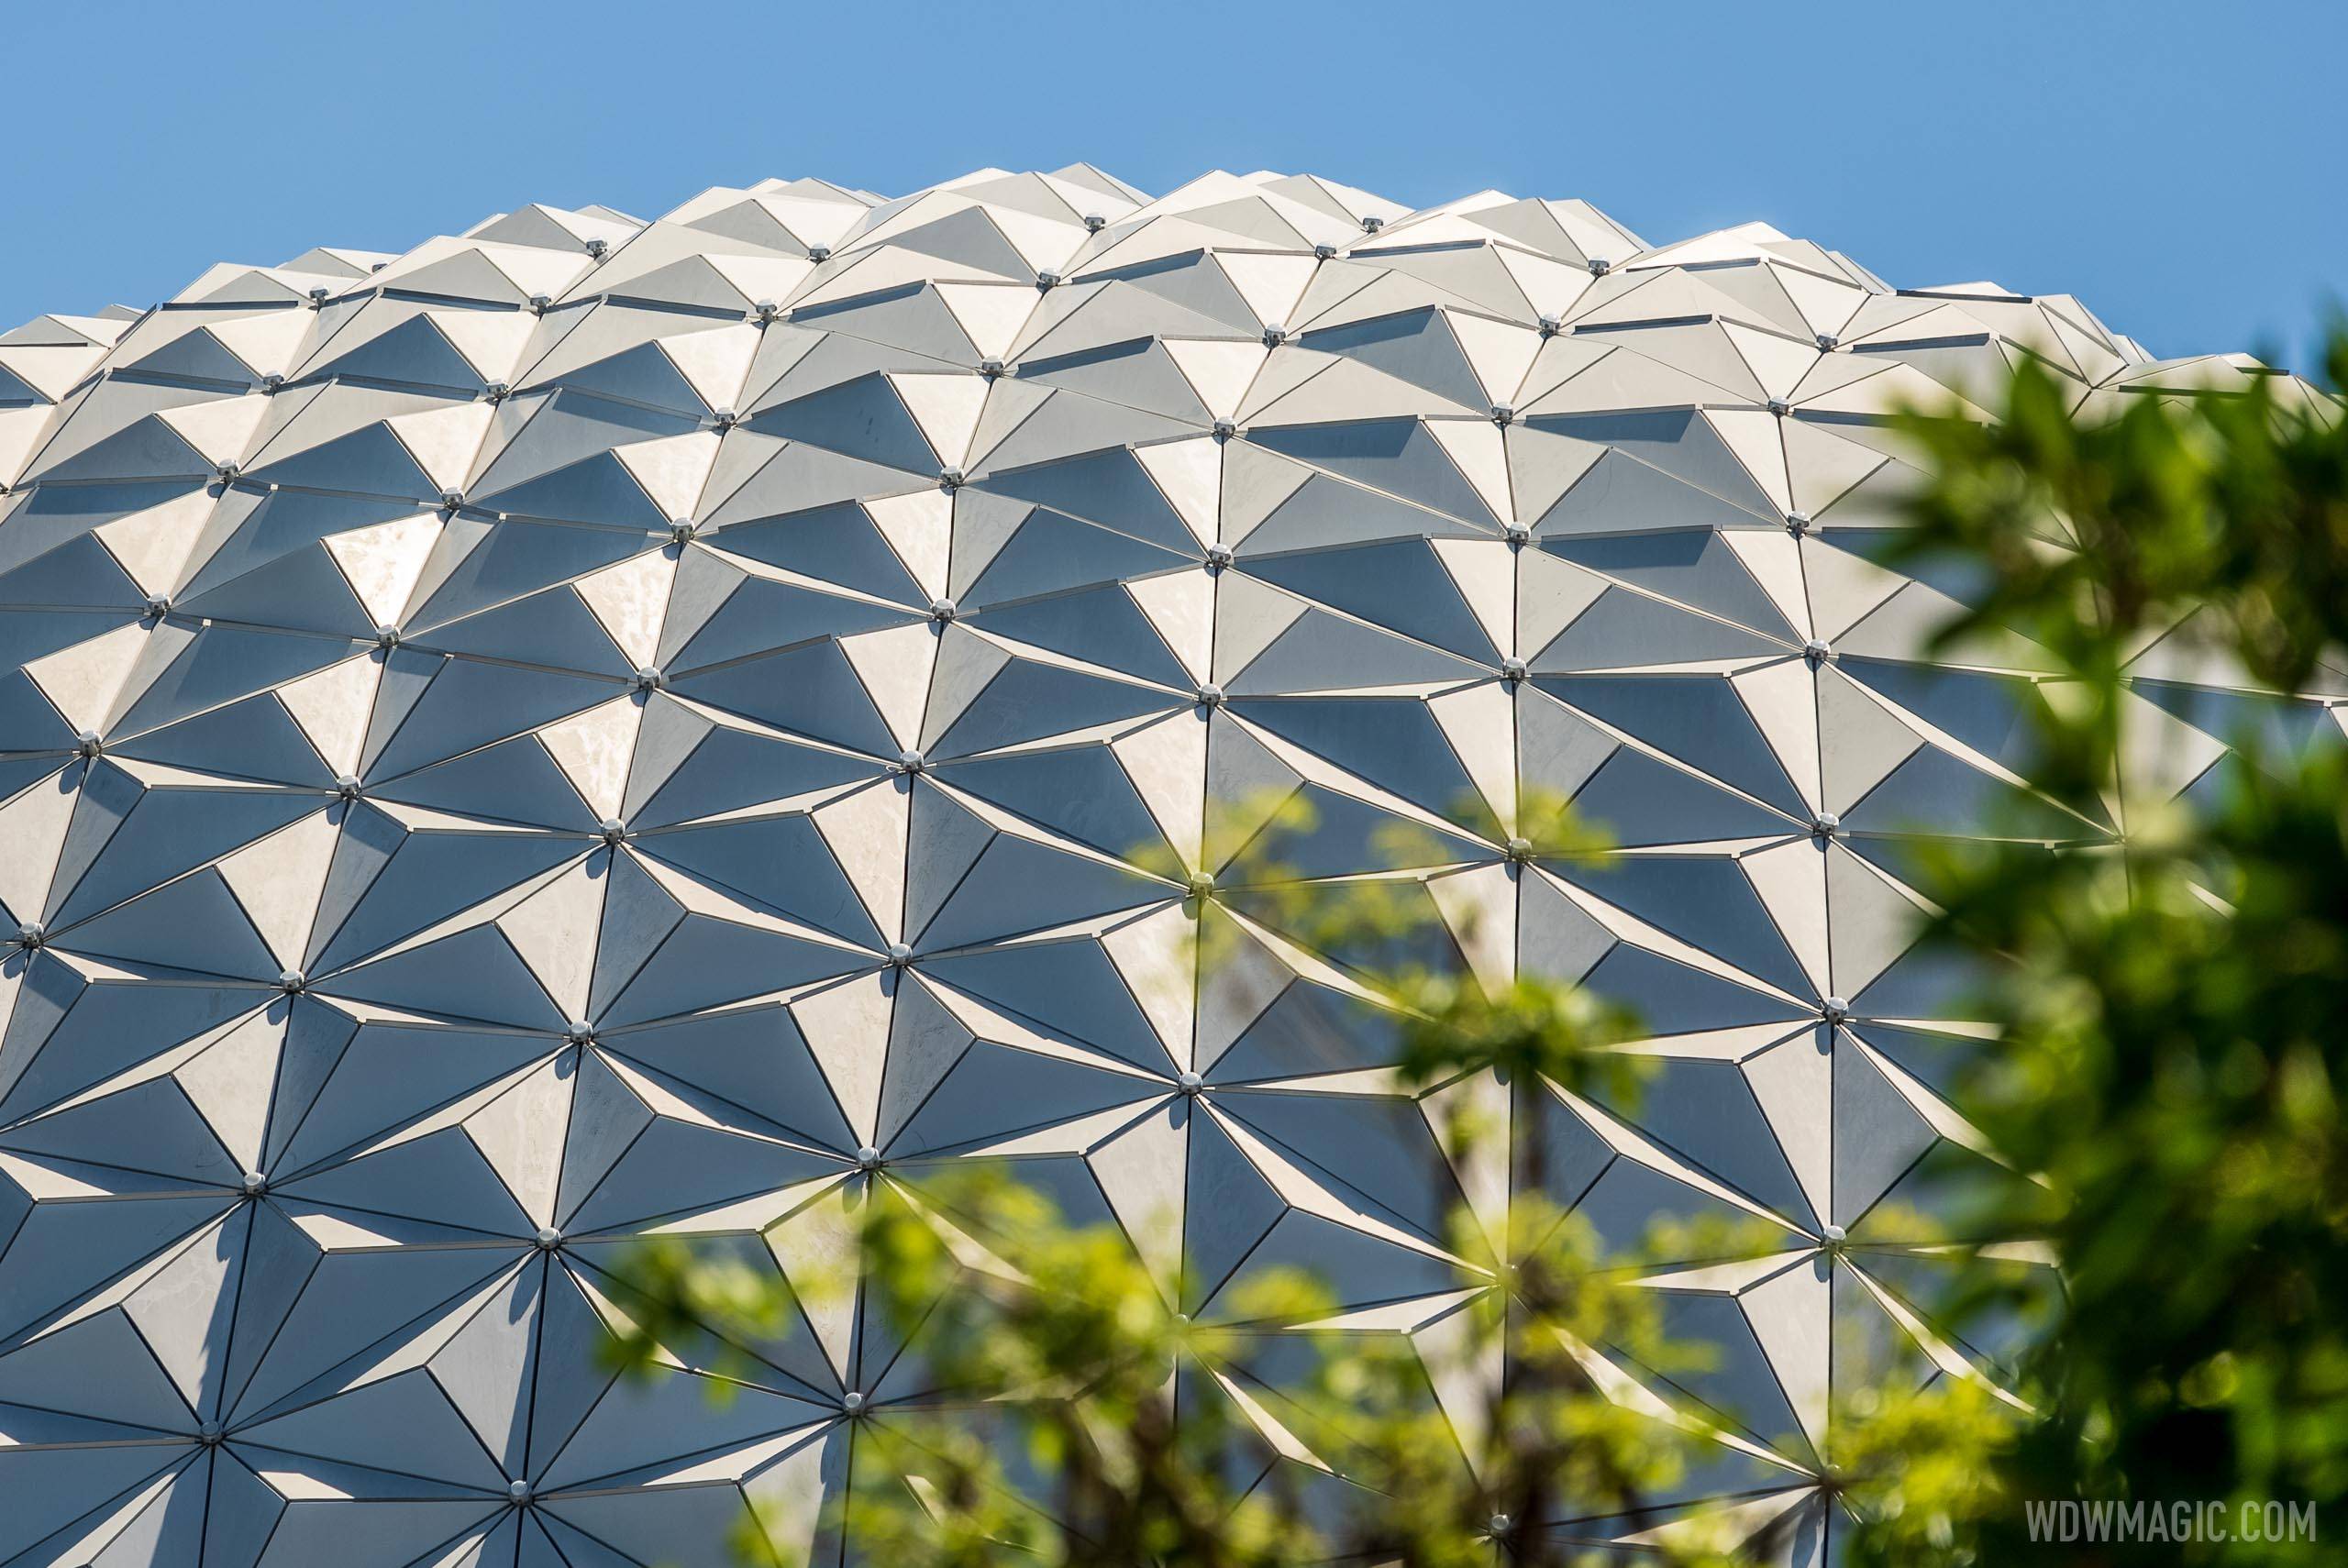 Spaceship Earth point of lights installation - June 1 2021